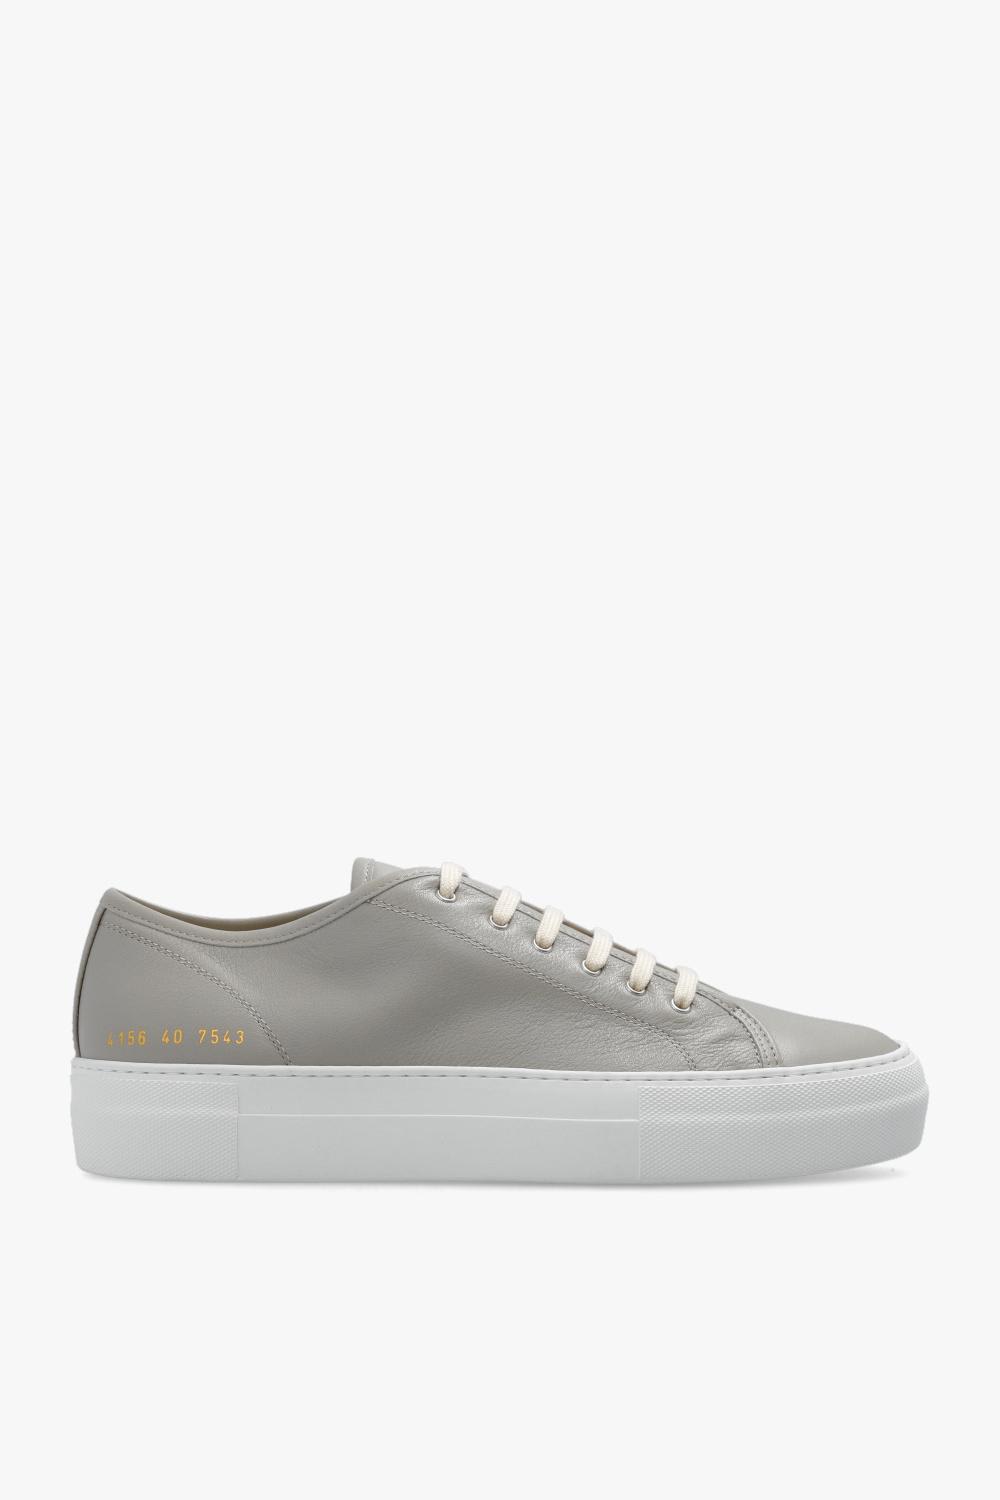 COMMON PROJECTS TOURNAMENT LOW CLASSIC SNEAKERS